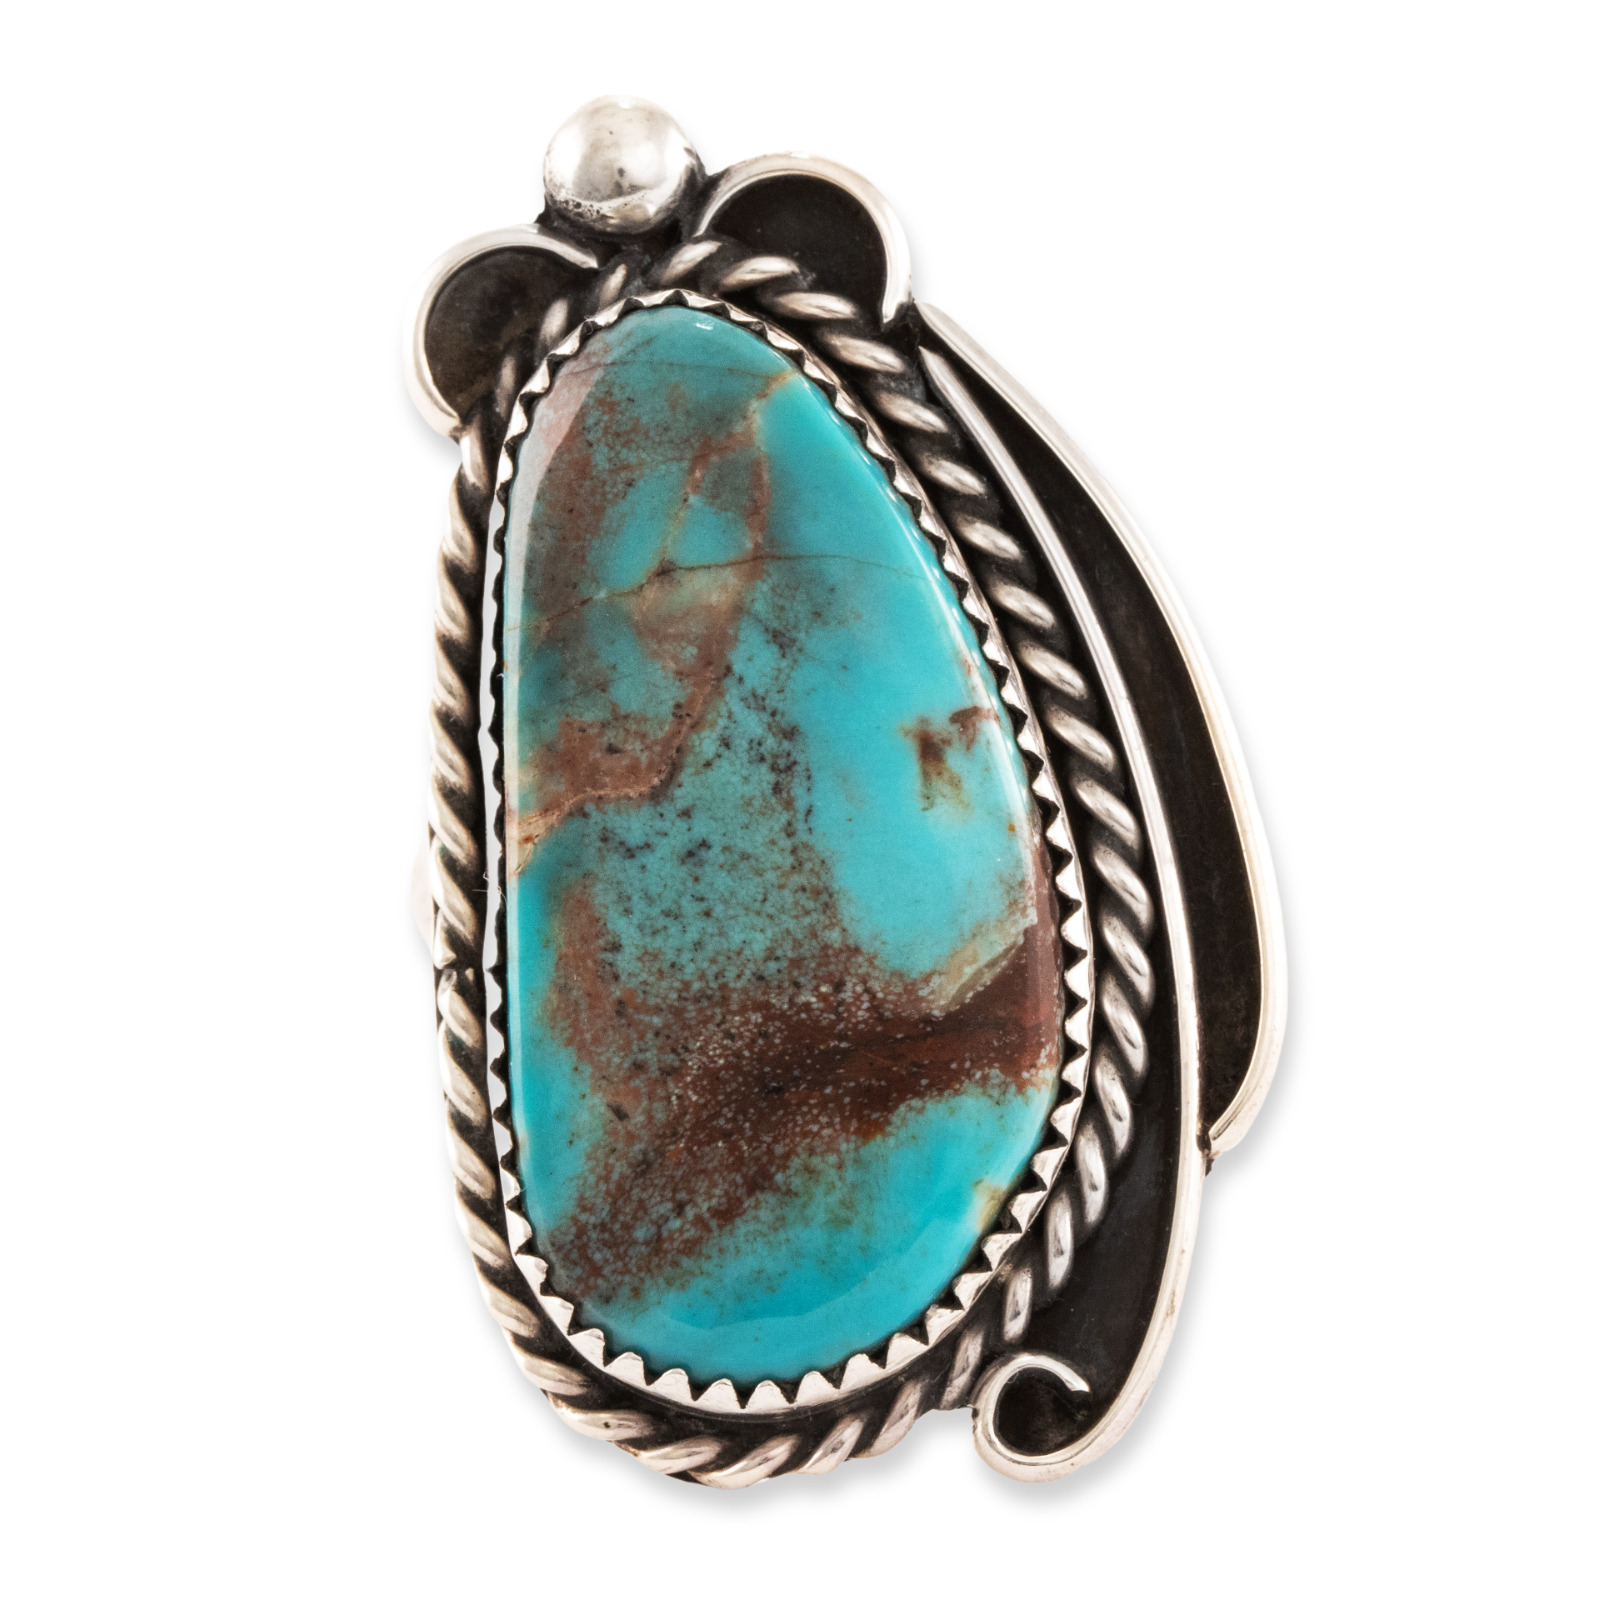 LARGE NATIVE AMERICAN STERLING SILVER SMOKY BISBEE TURQUOISE TENDRILS RING 11